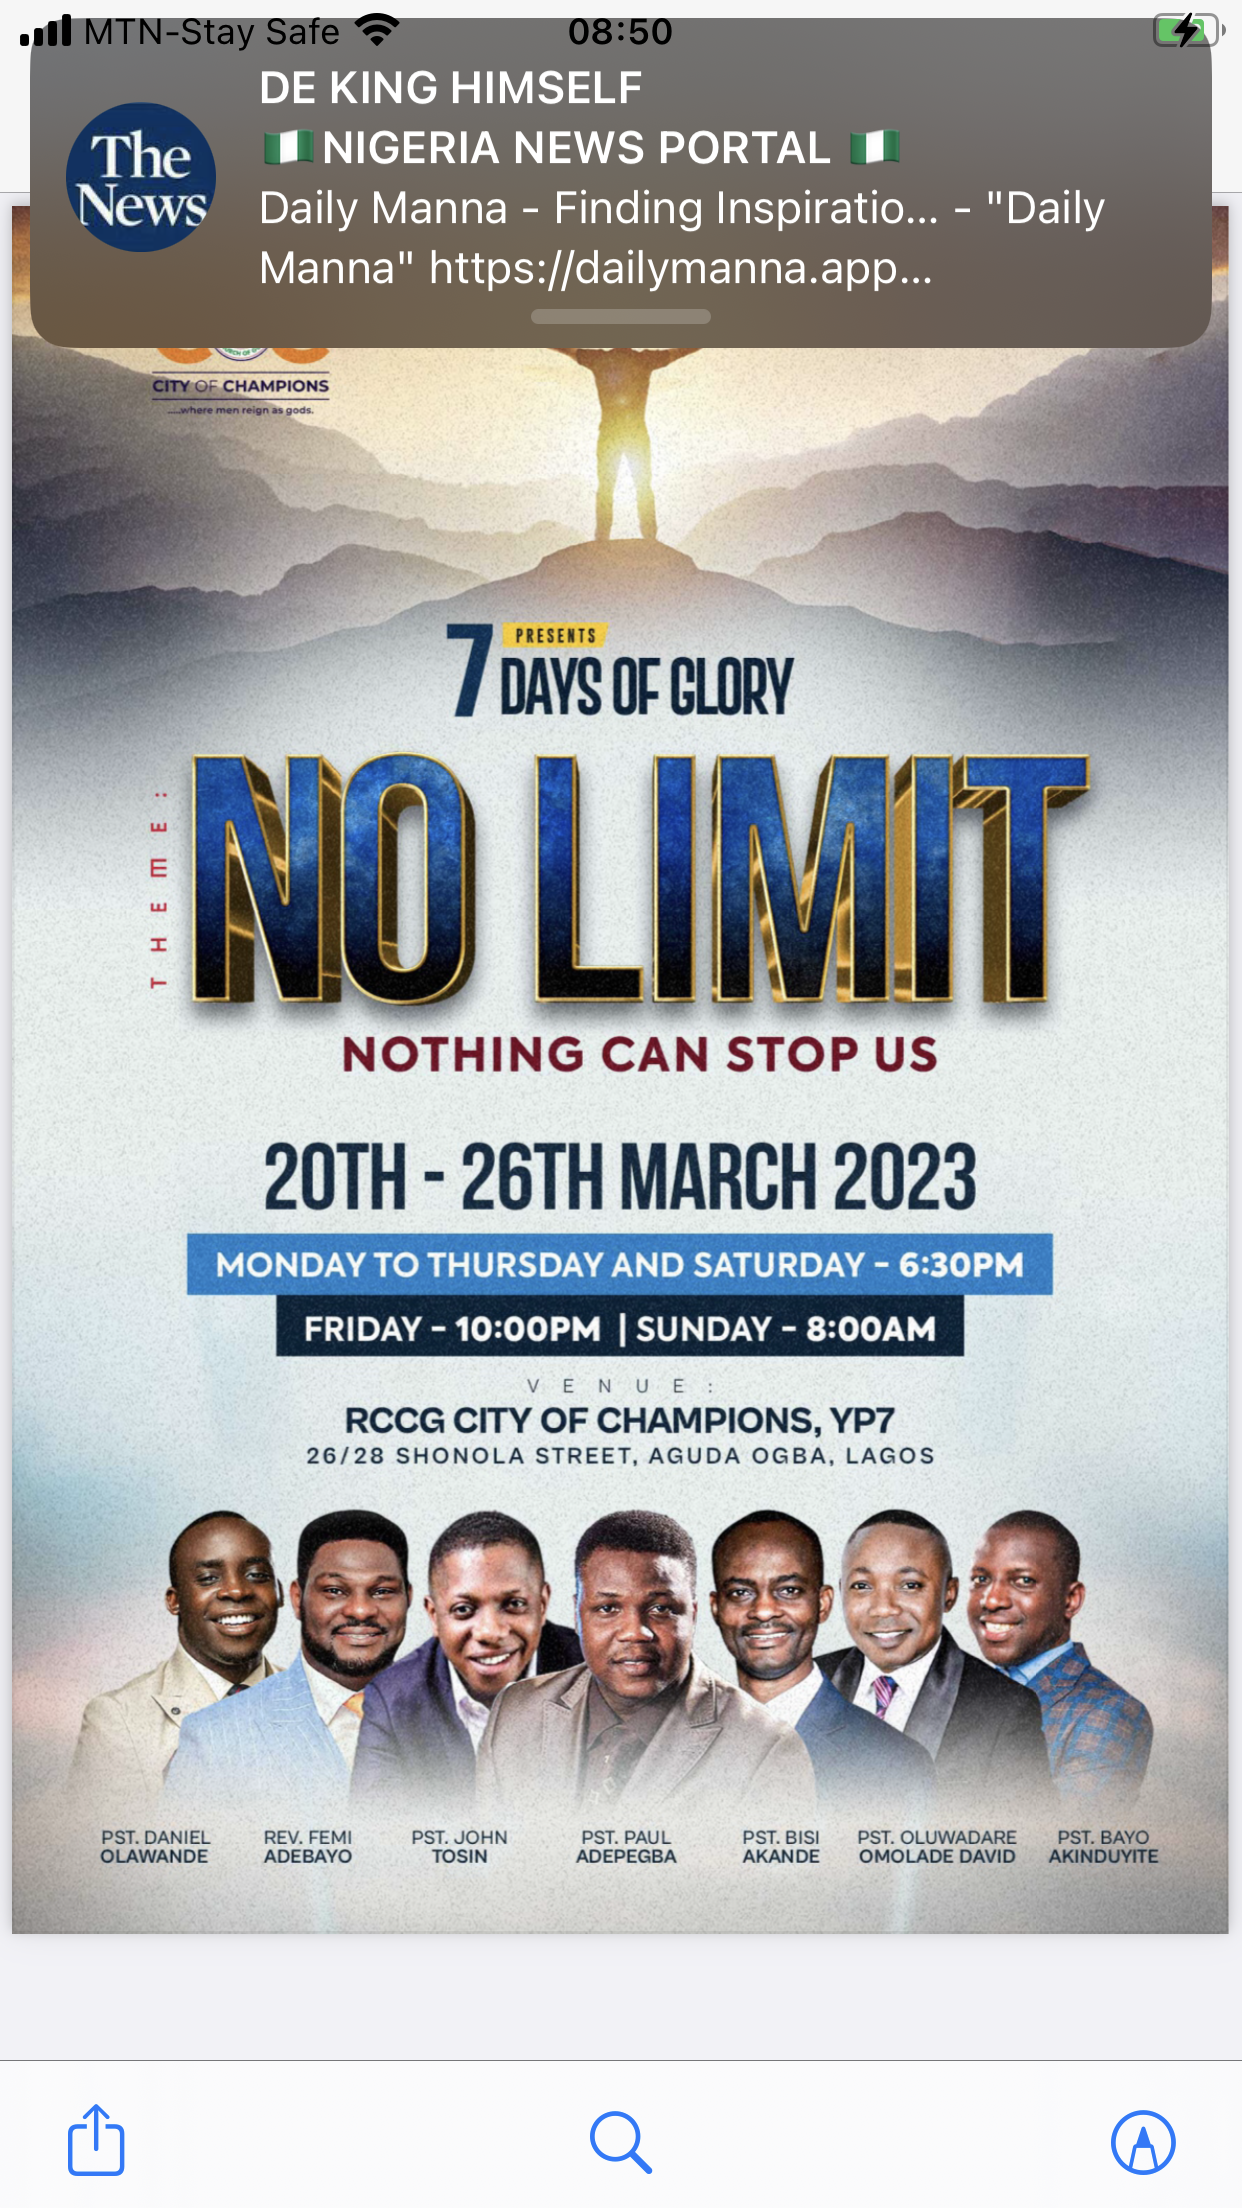 RCCG City of Champions Holds 7 Days of Glory